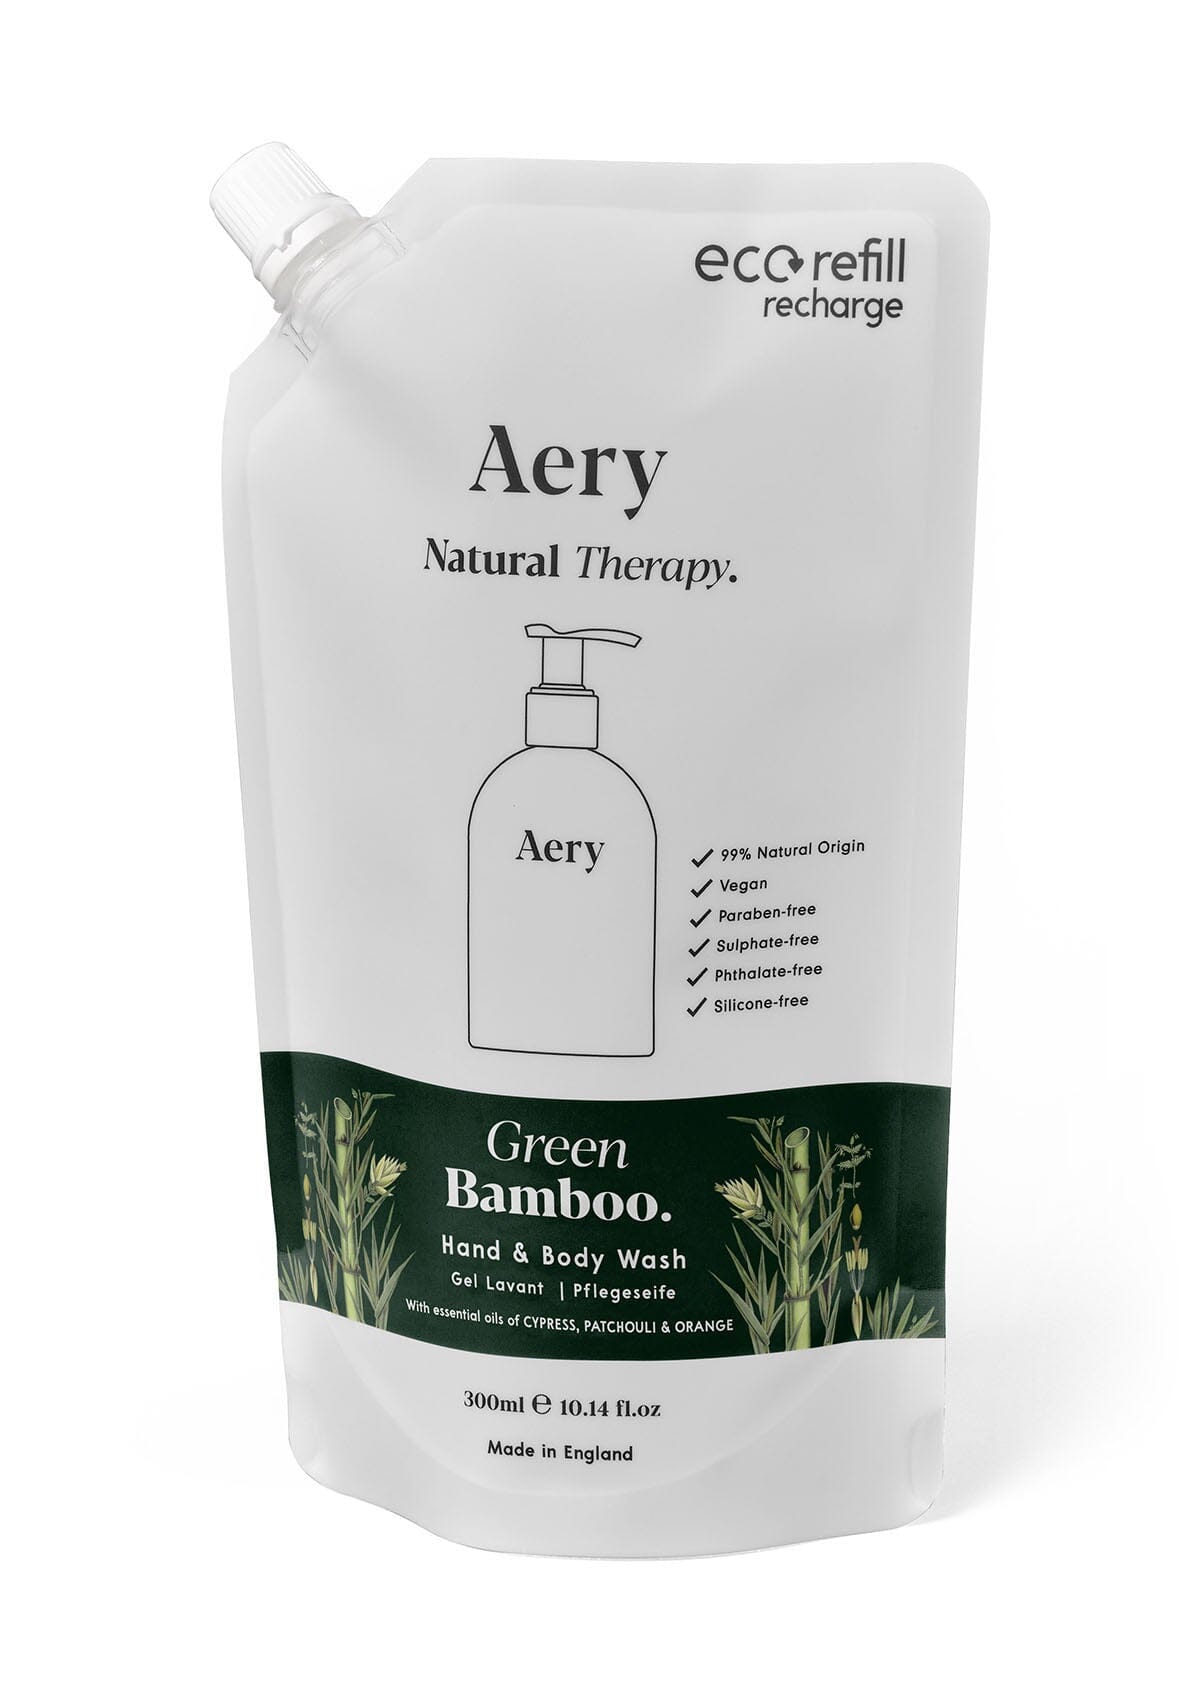 Green Bamboo hand and body wash refill pouch by Aery displayed on white background 